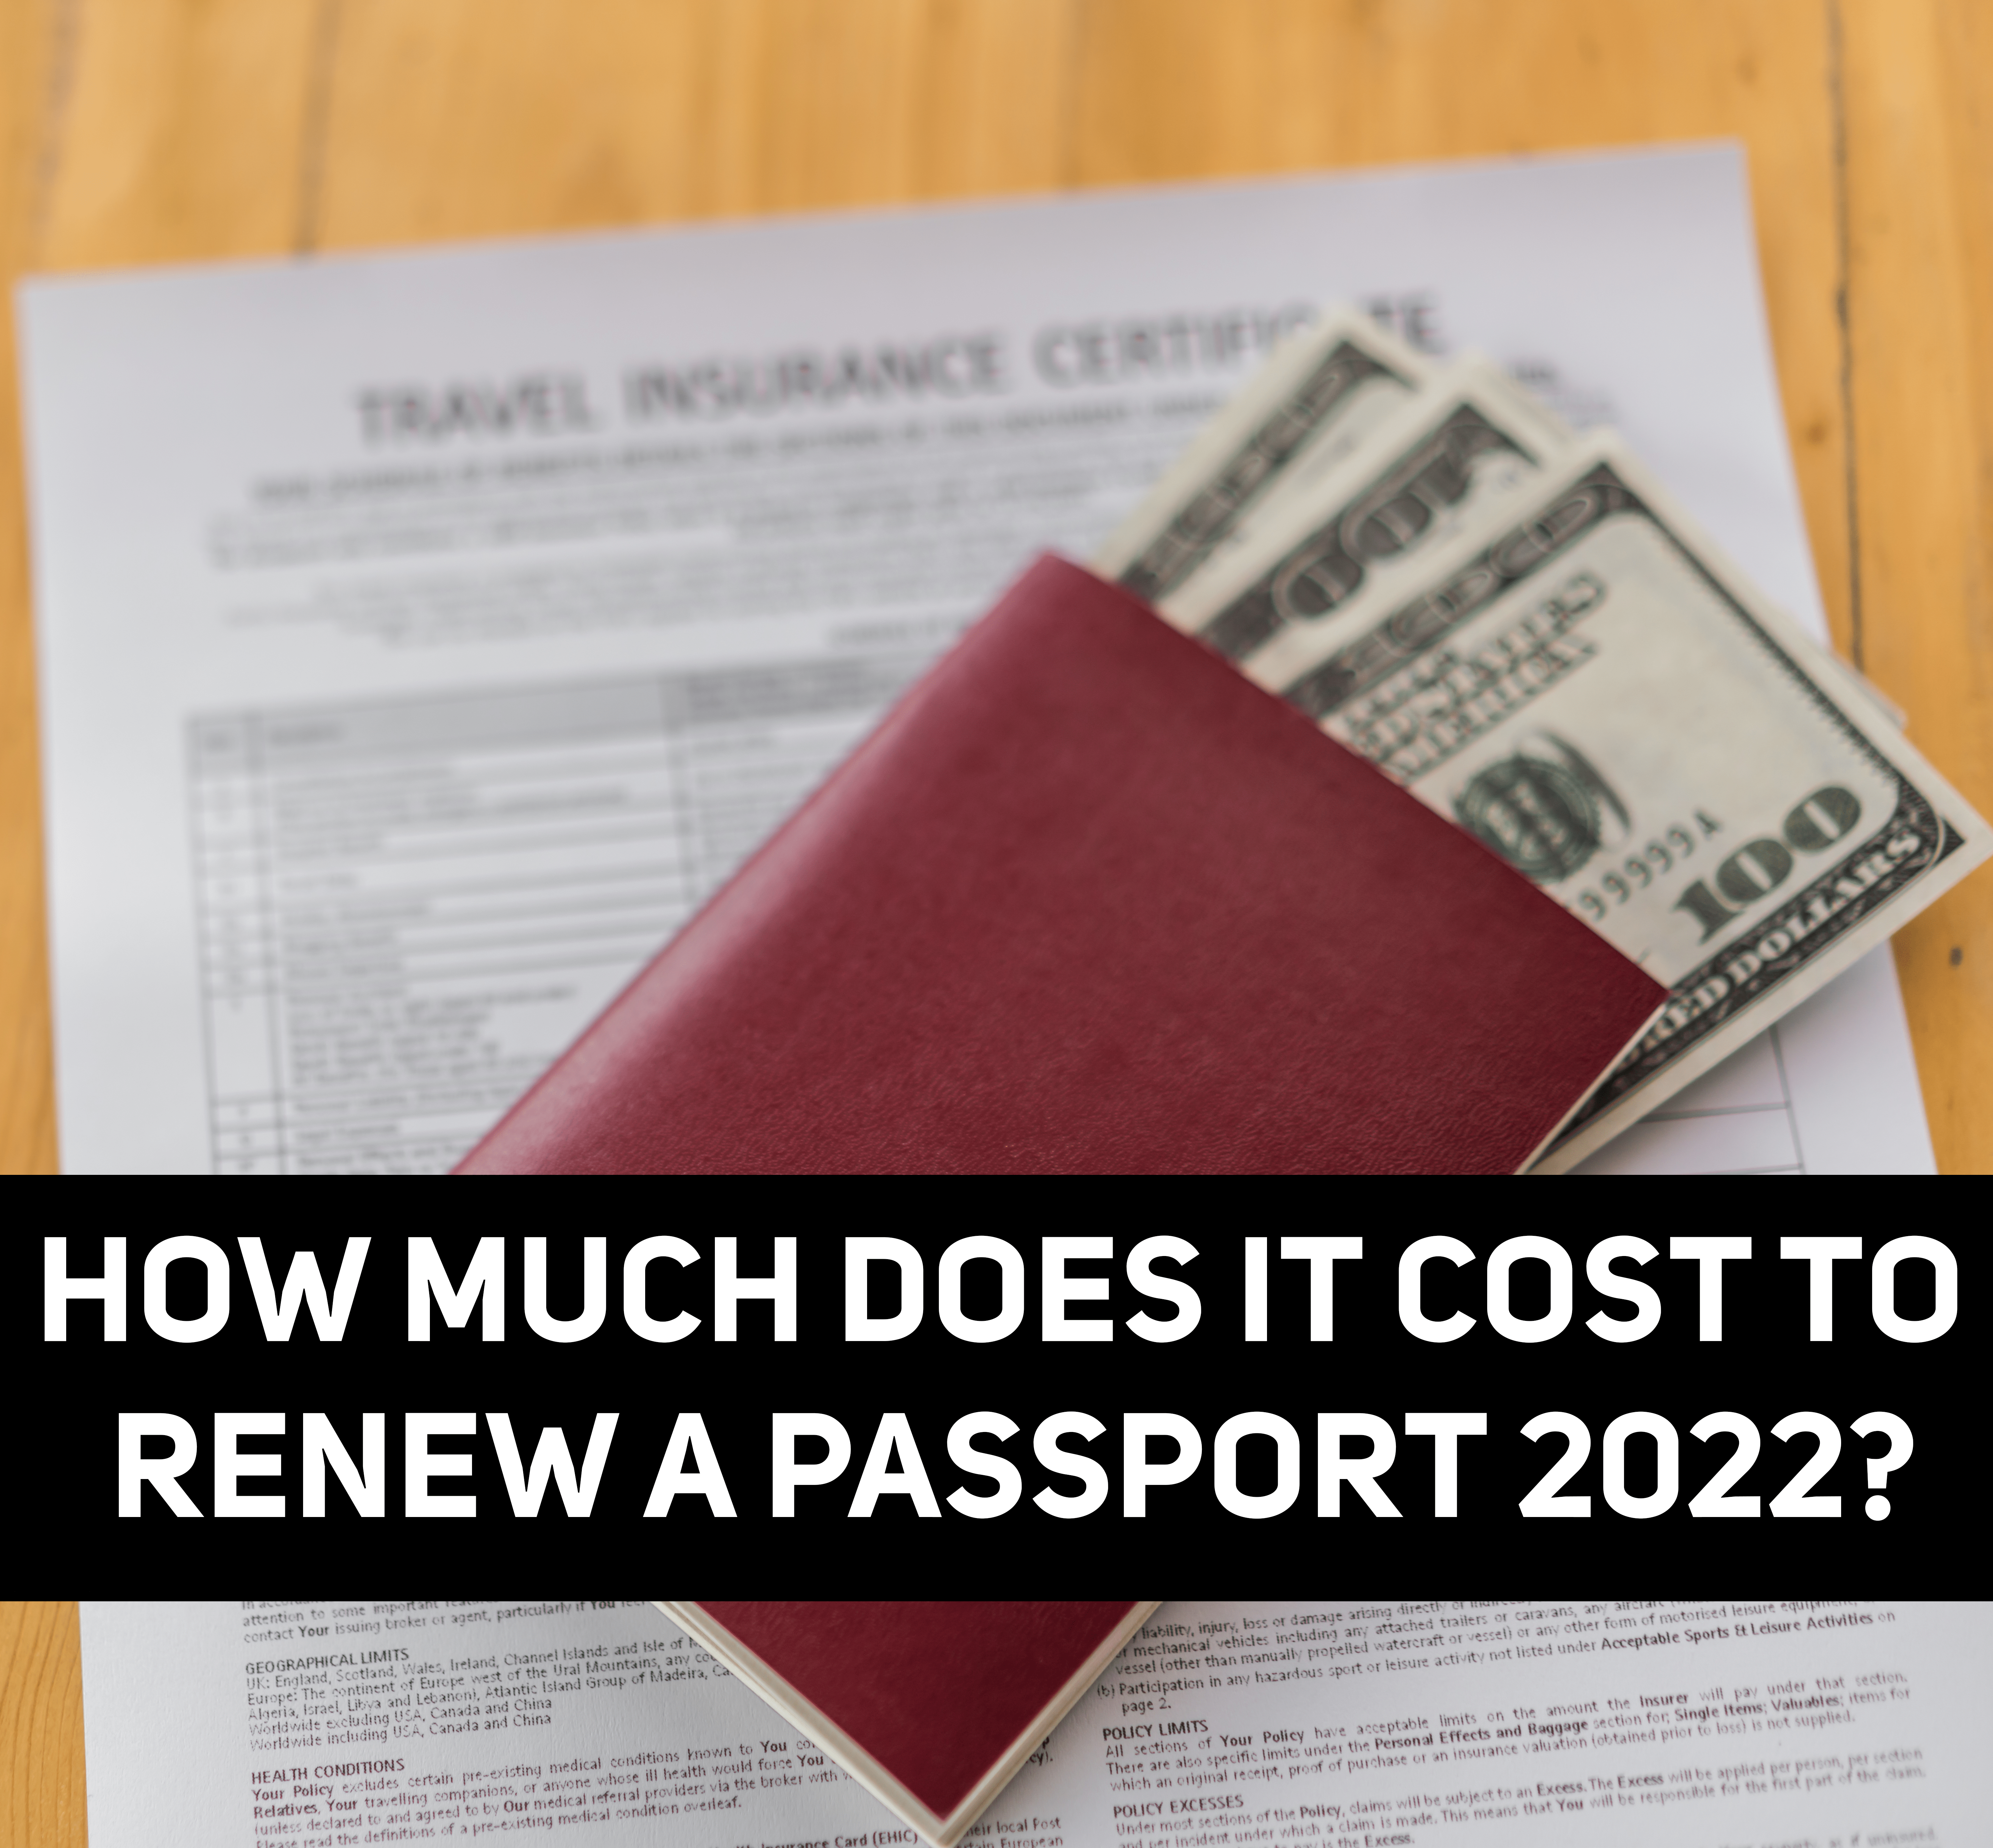 How Much Does it Cost to Renew a Passport